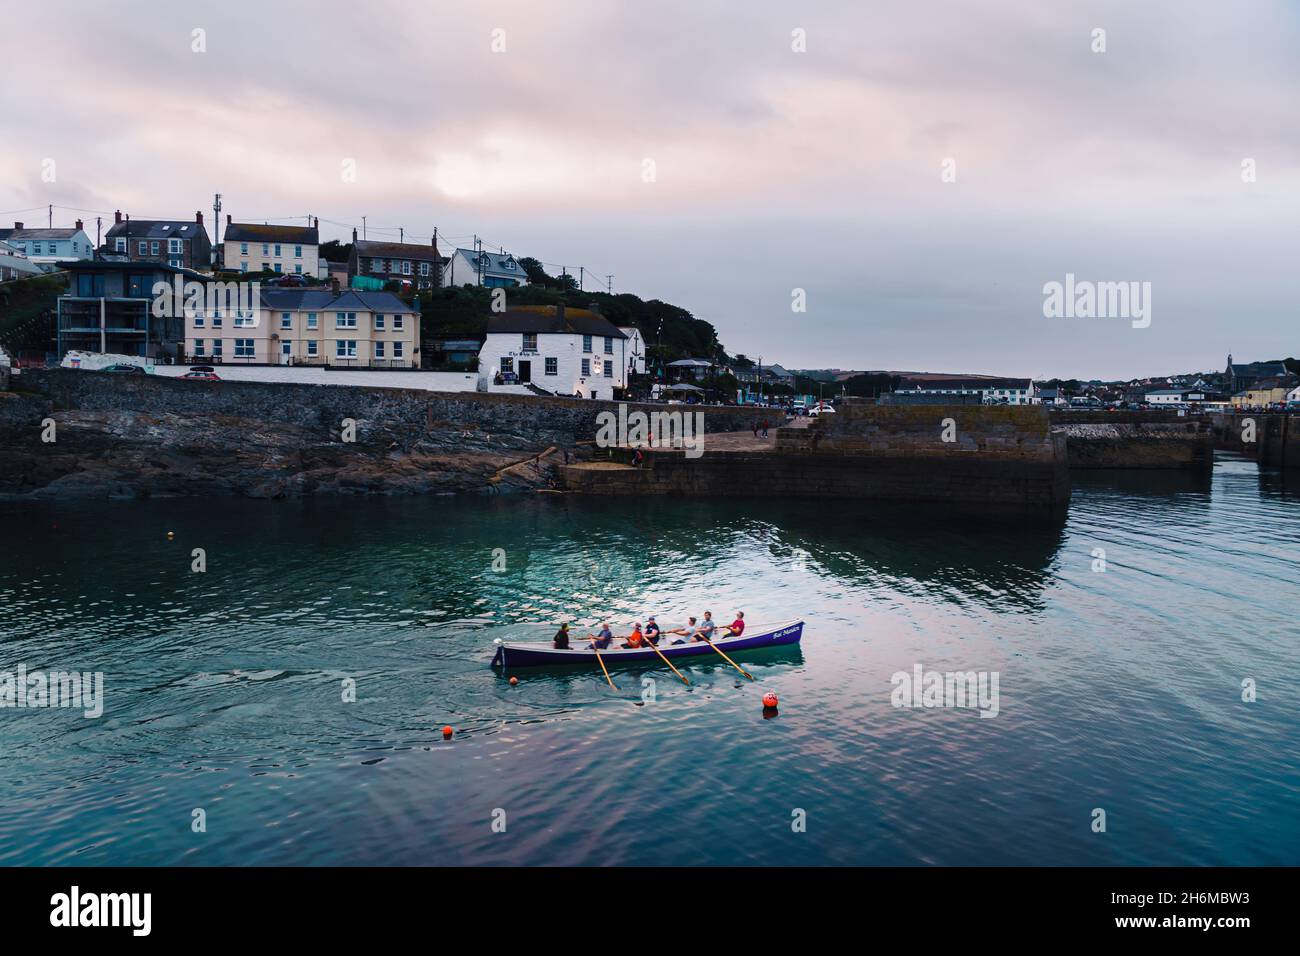 Cornish tradition of gig rowing being practiced at Porthleven, Cornwall Stock Photo